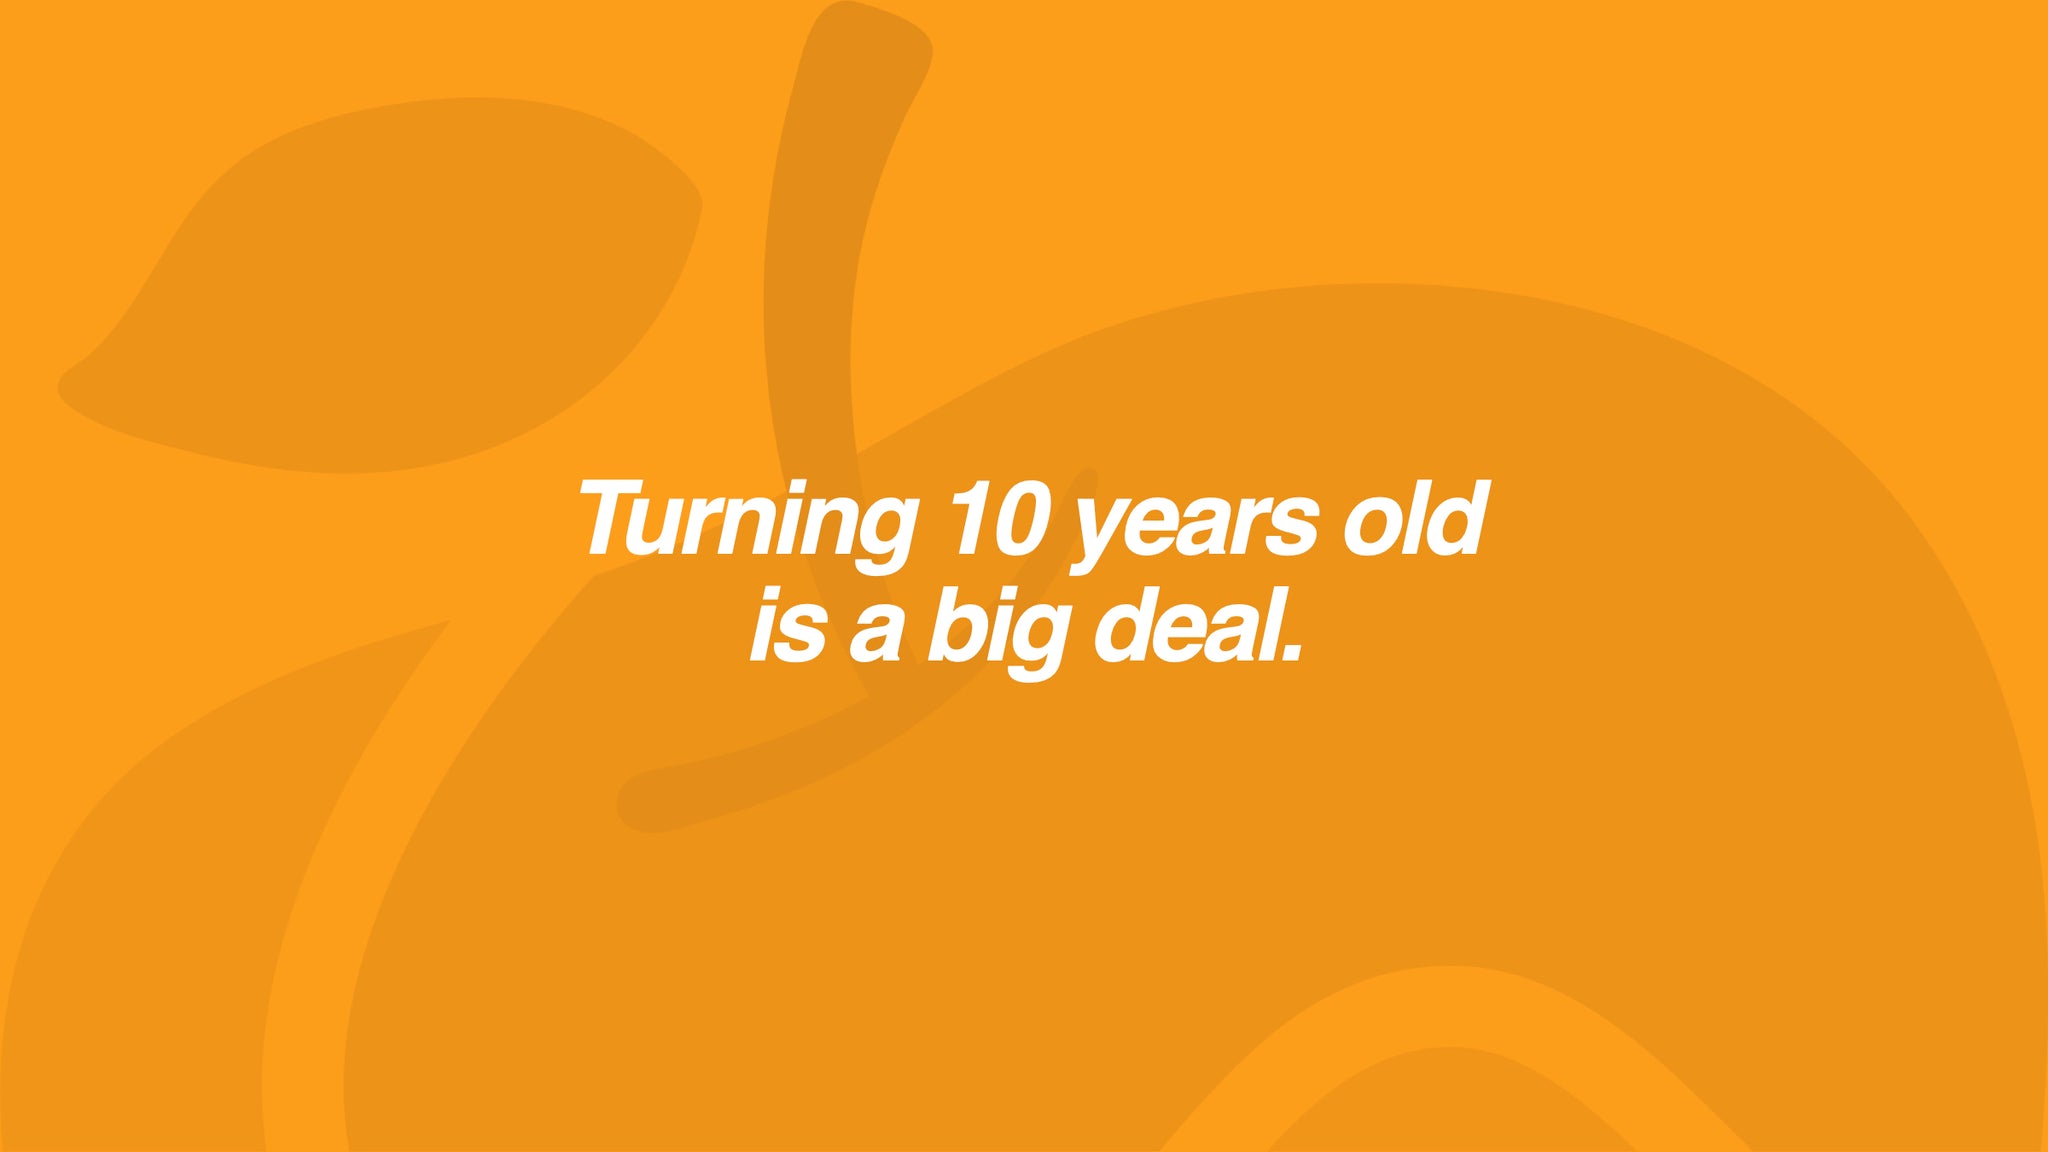 Turning 10 years old is a big deal.